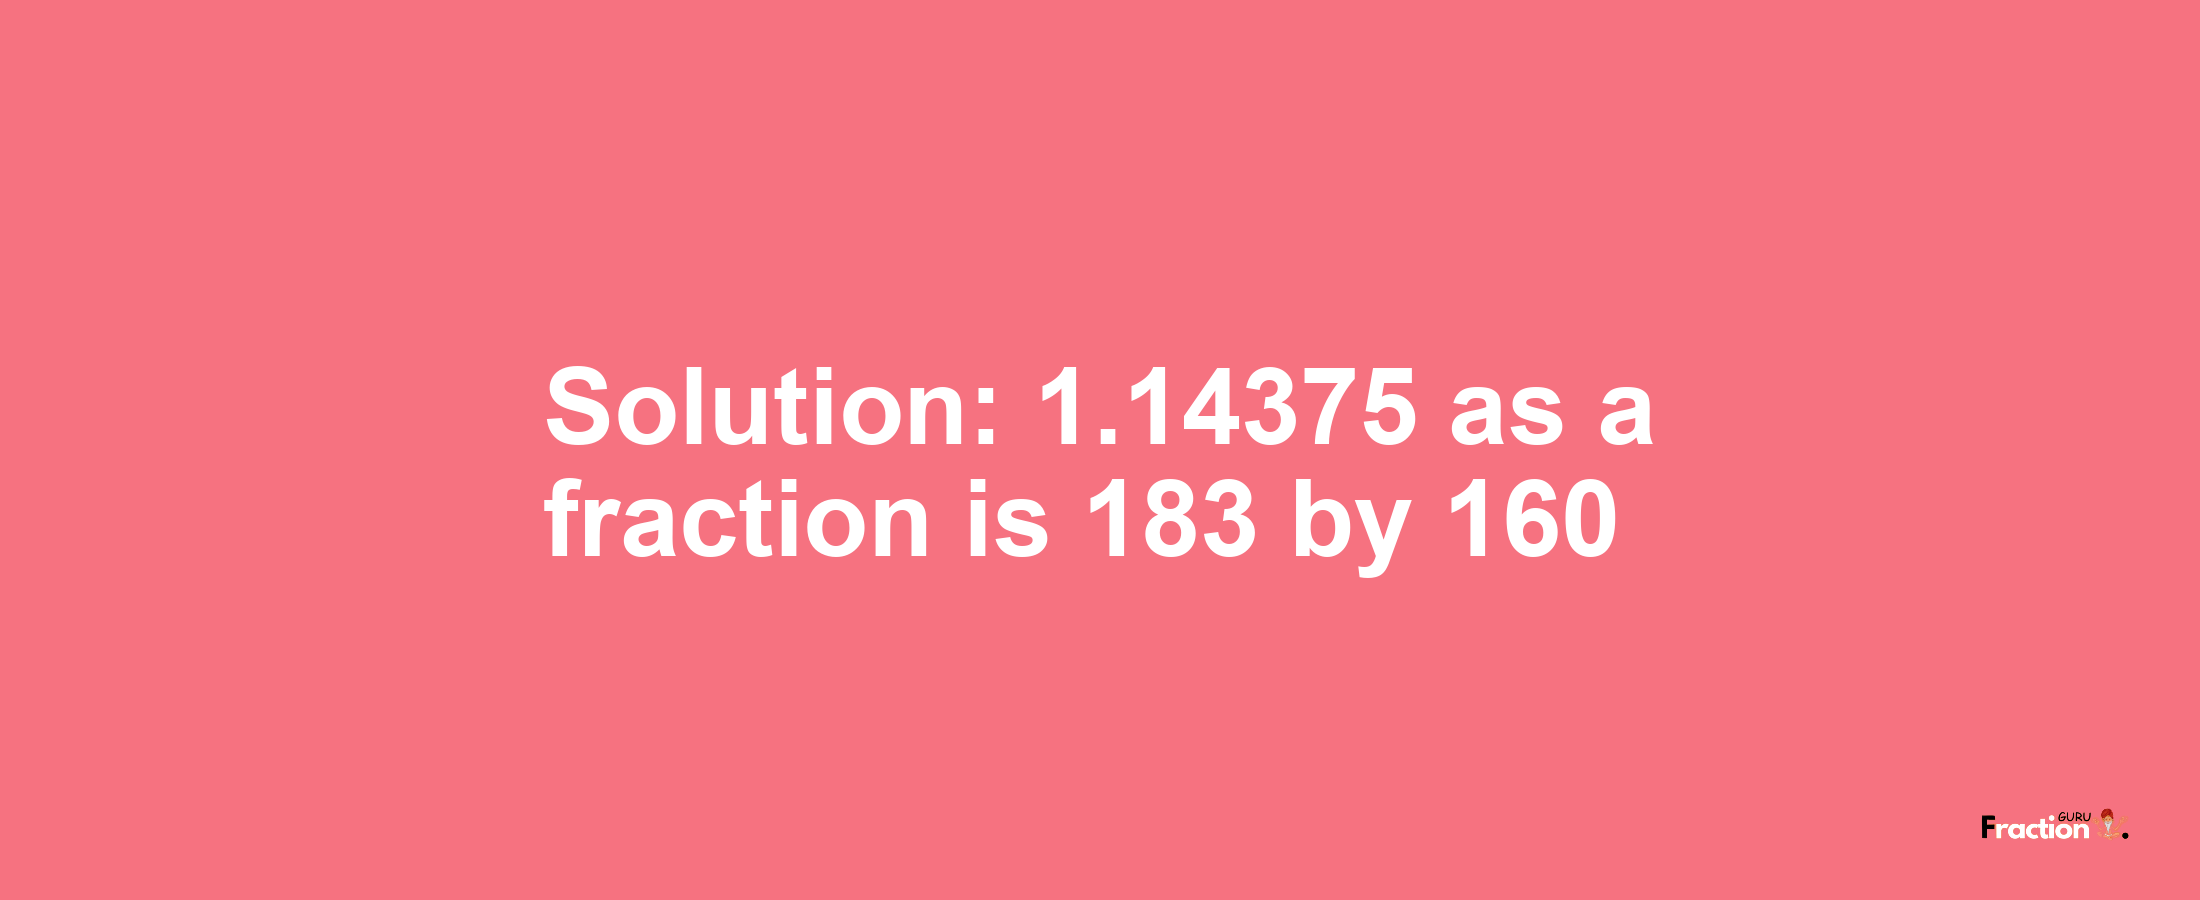 Solution:1.14375 as a fraction is 183/160